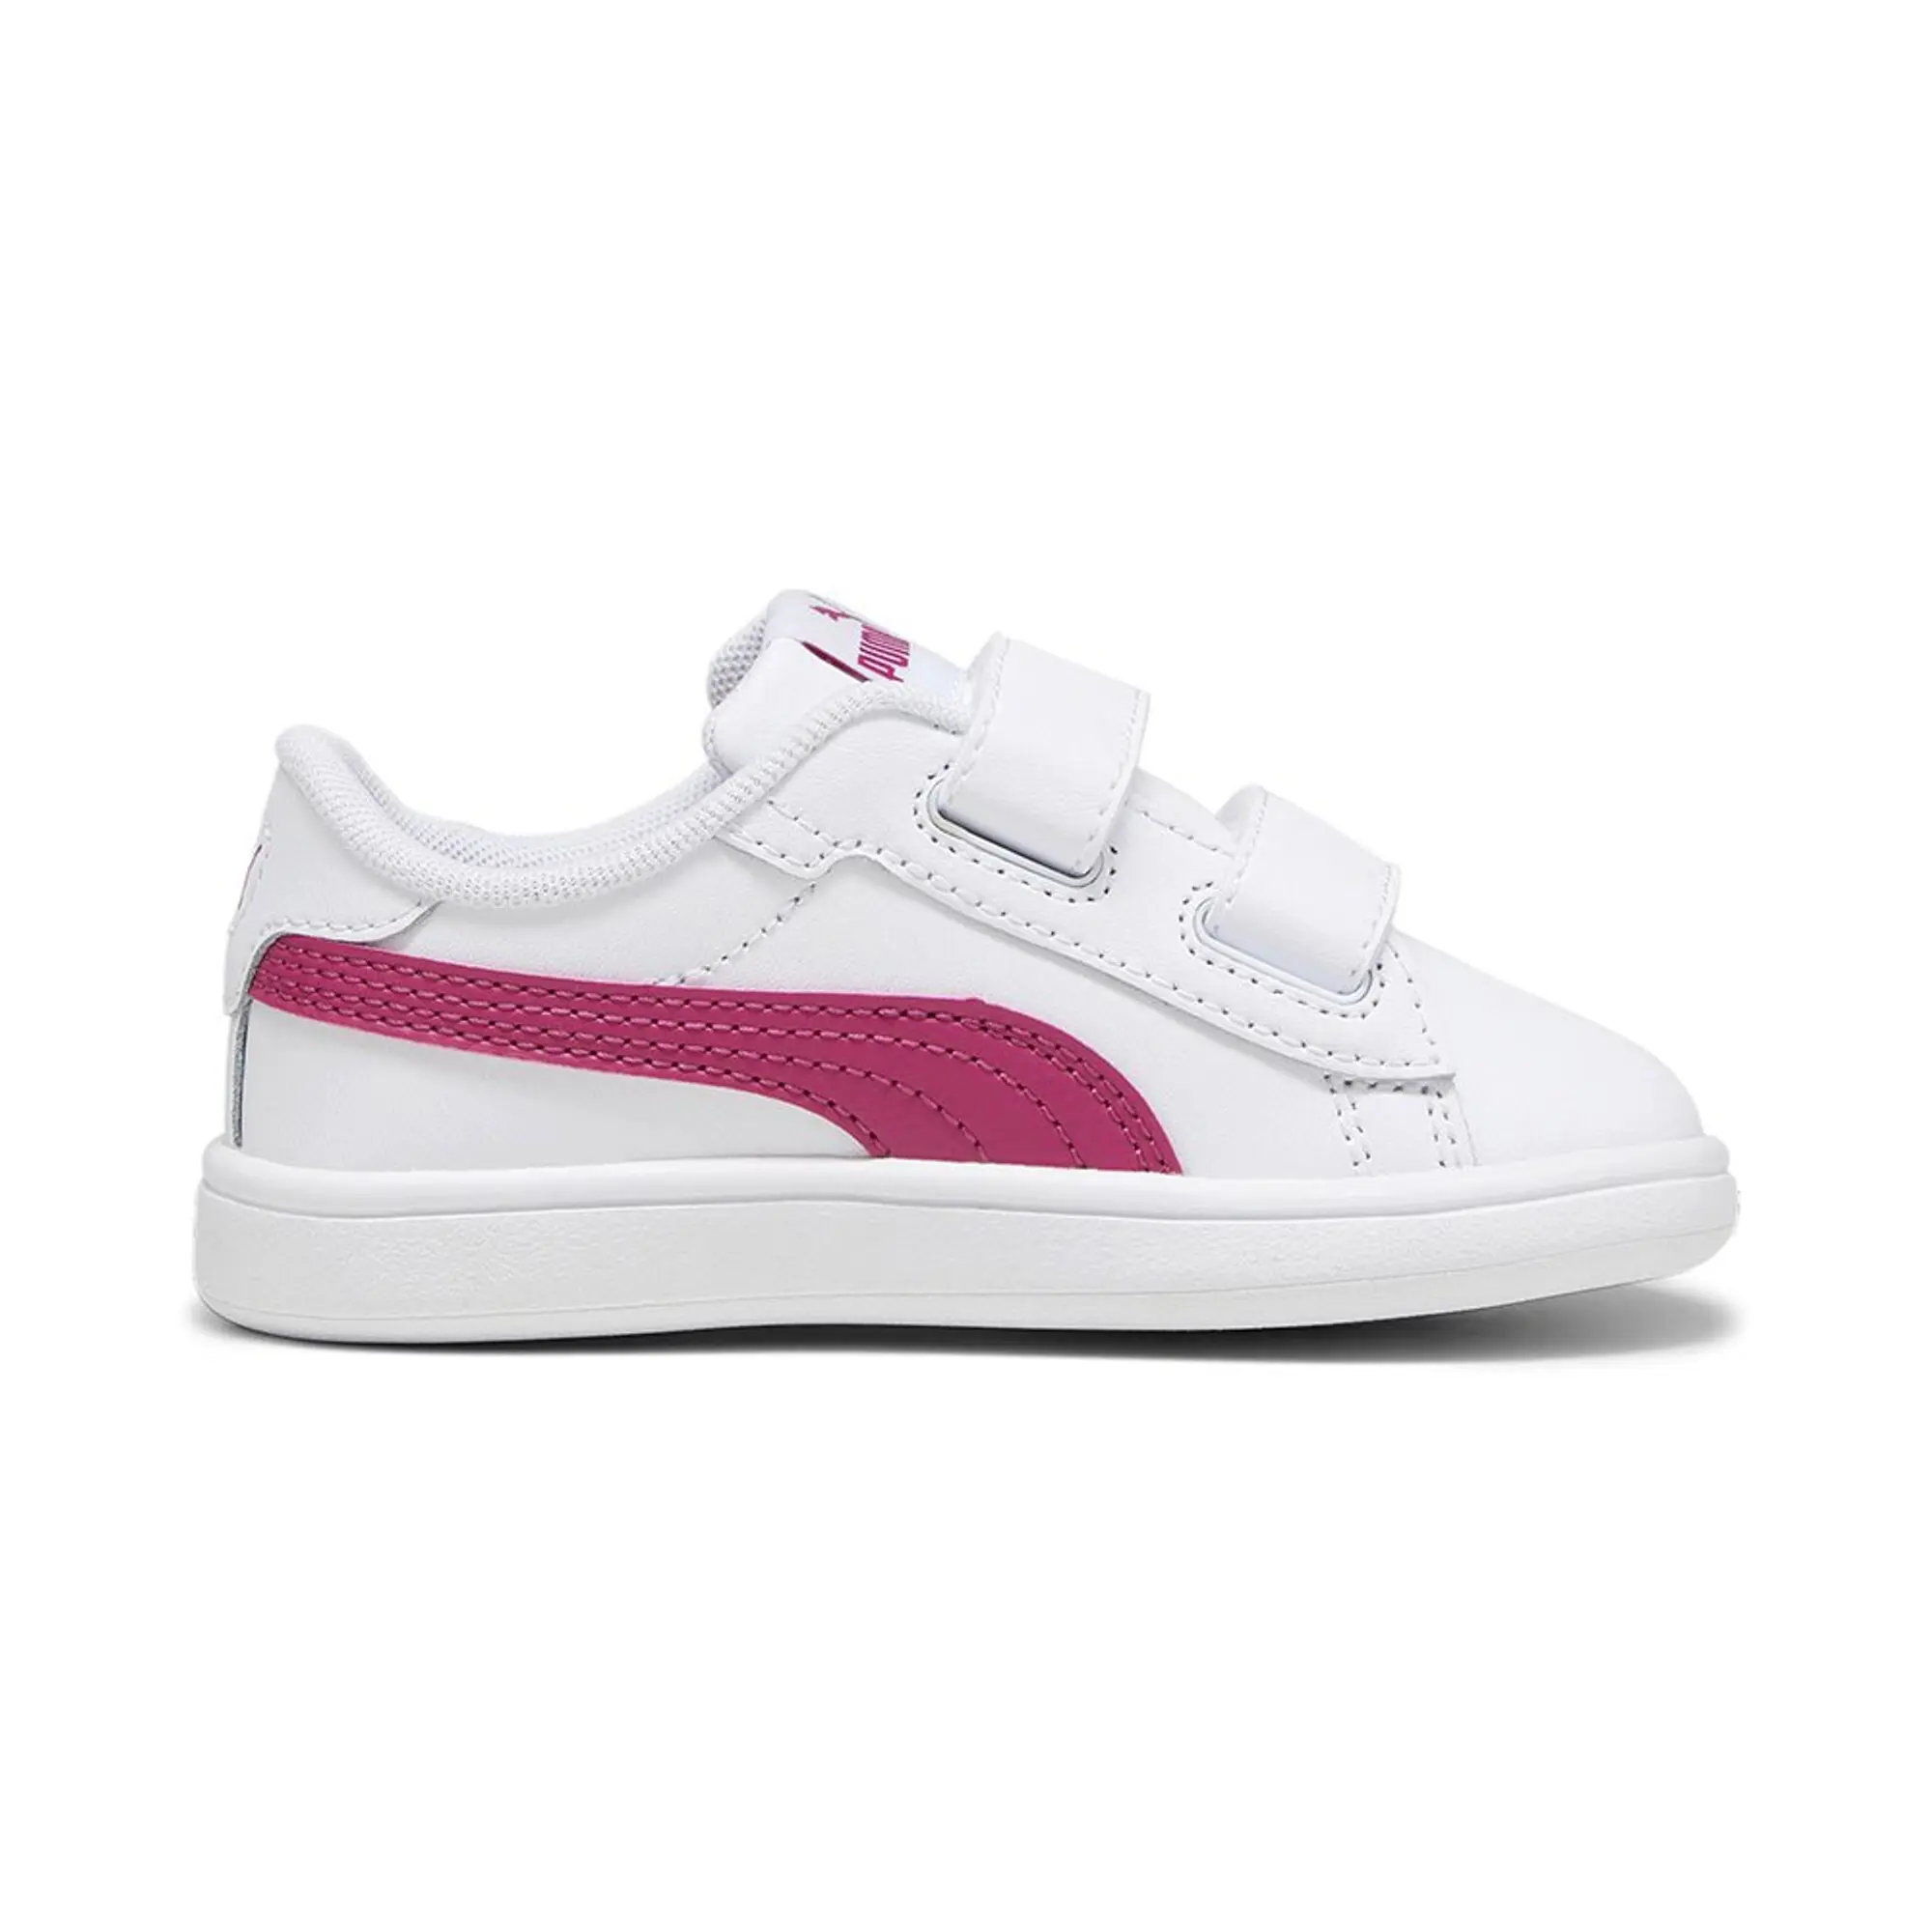 PUMA Smash 3.0 Leather V 392034_10 Baby, White/Pinktastic Sneakers 